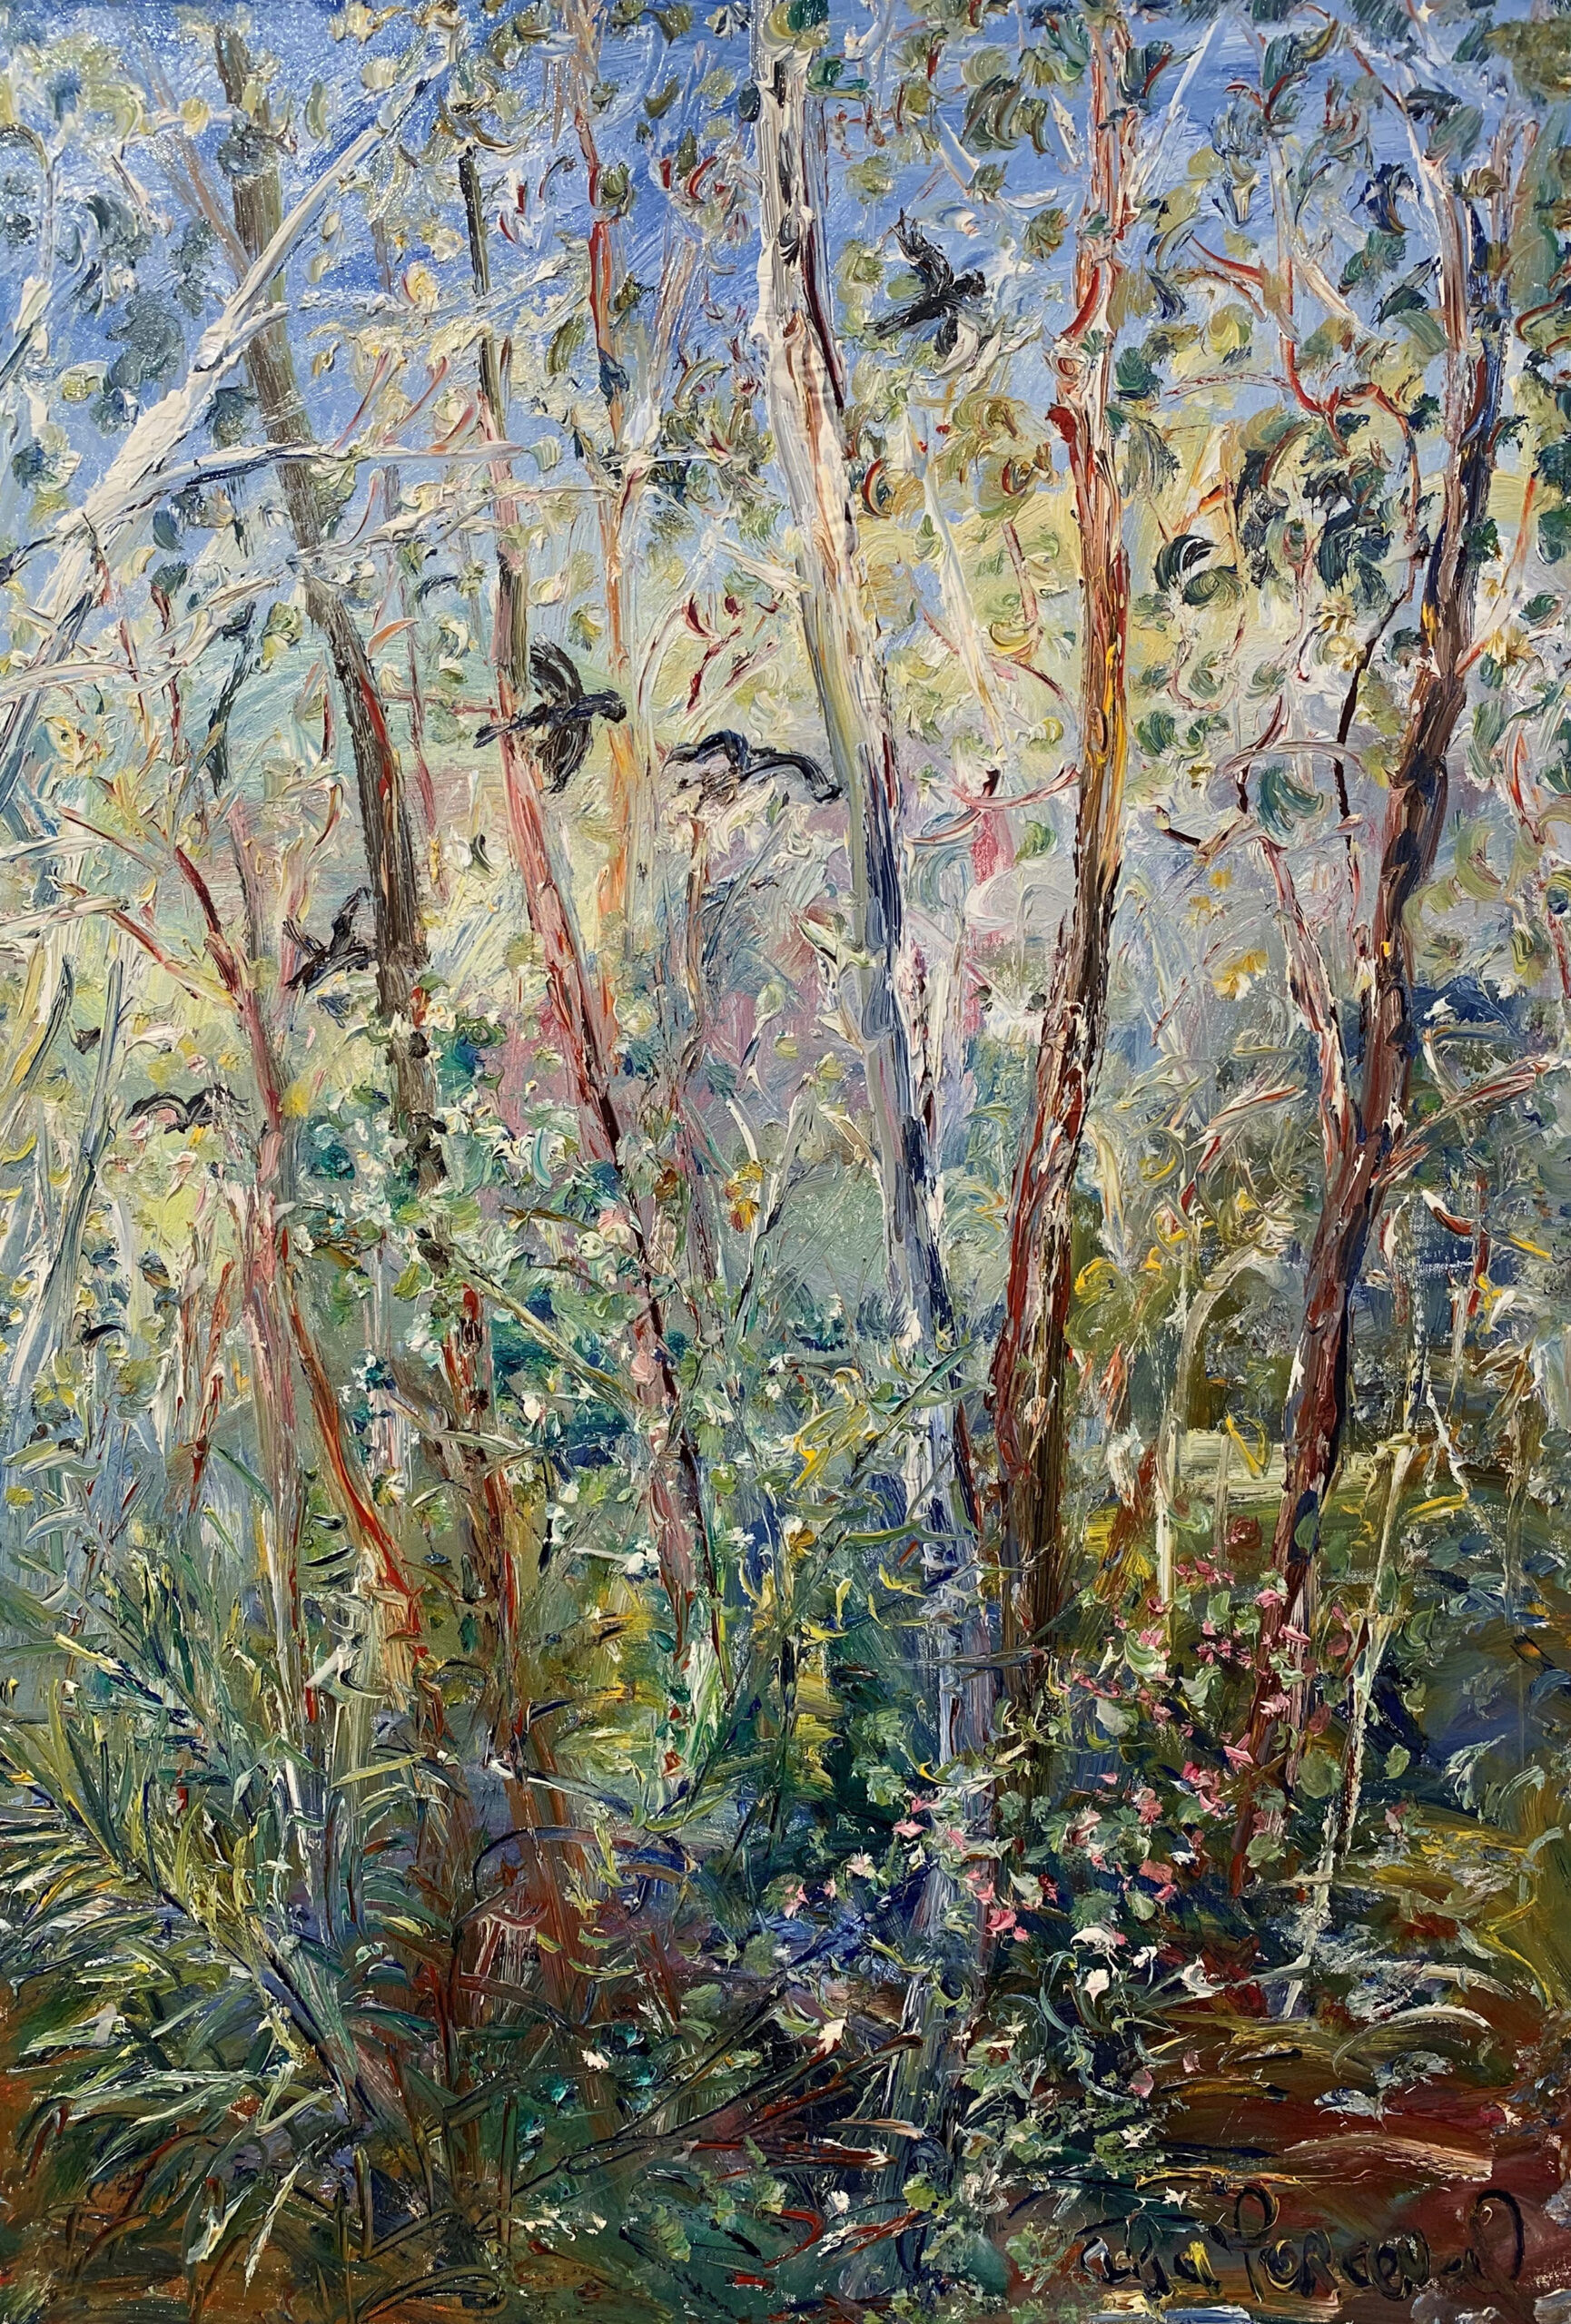 Perceval-Black Cockies Passing Through Corrine Forest NSW-oil on canvas-100 x 69cm-master